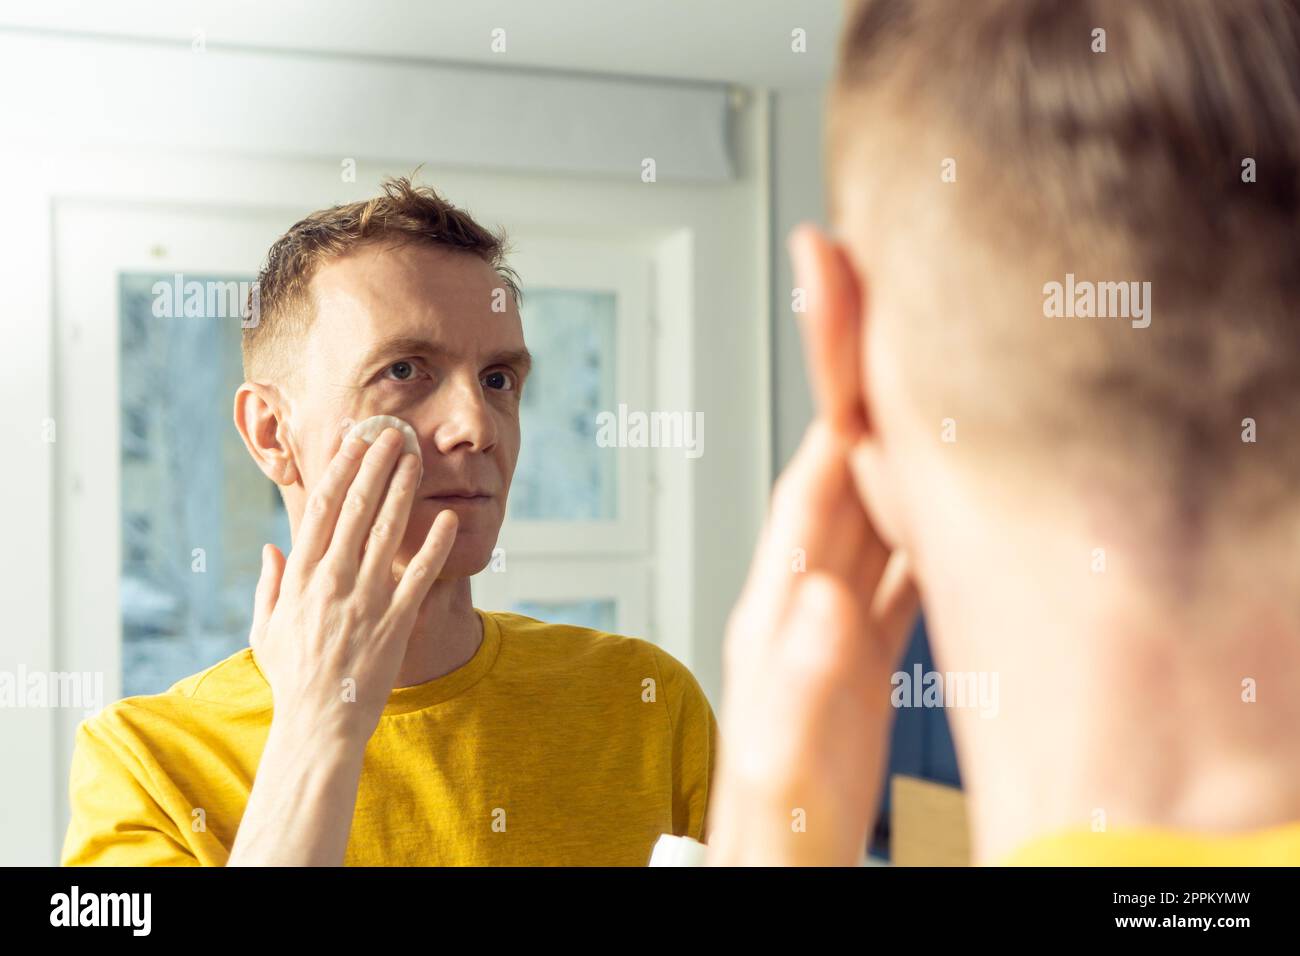 Middle aged man apply face tonic with cotton pad, then massage with hands. Male portrait in mirror. Face cleansing. Stock Photo